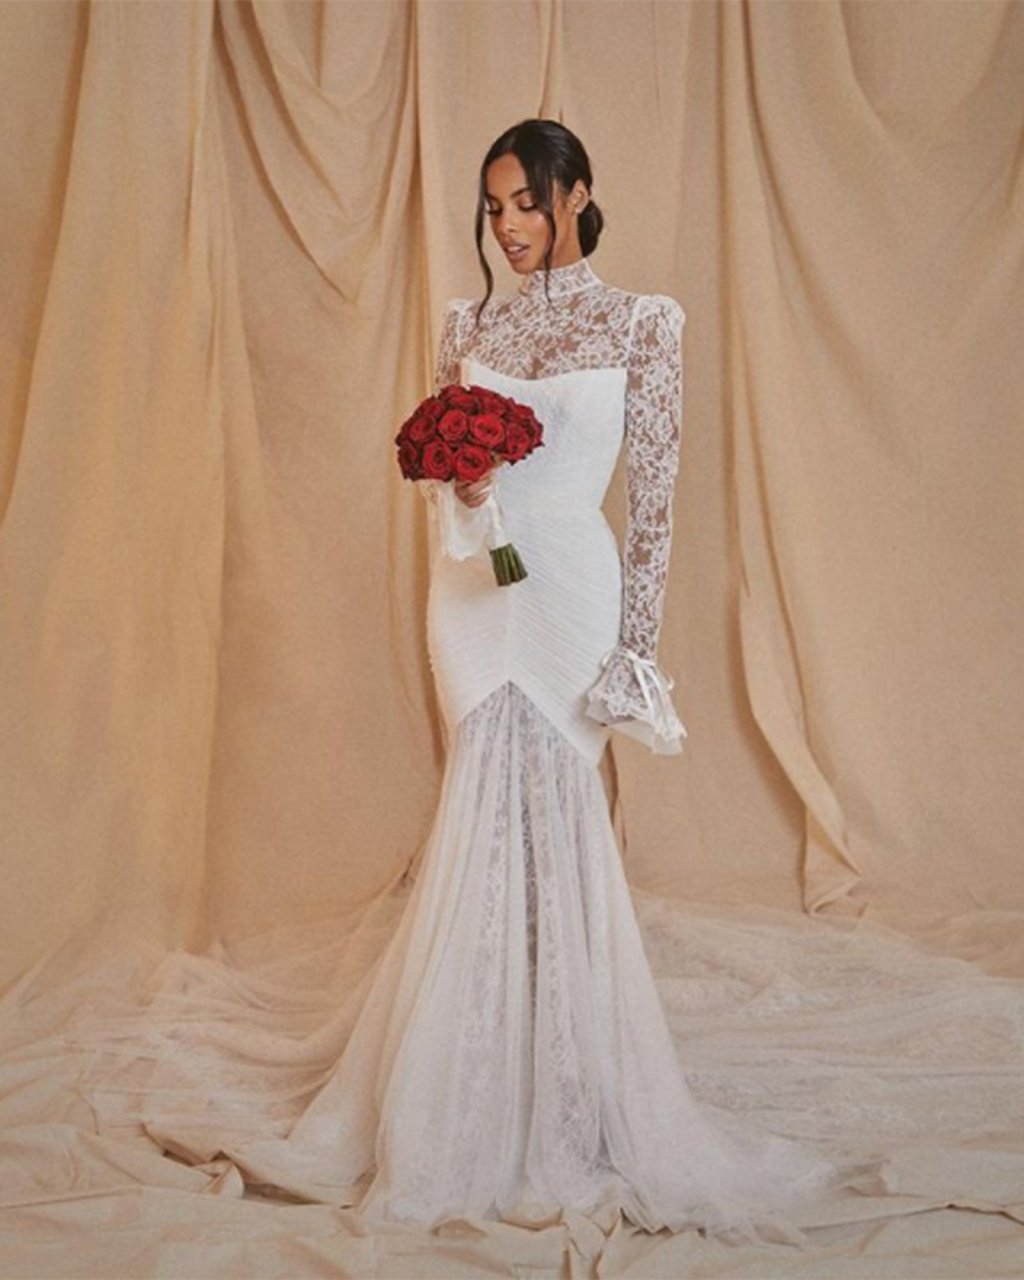 Wedding Dresses Online: Where To Shop For Your Dream Bridal Dress